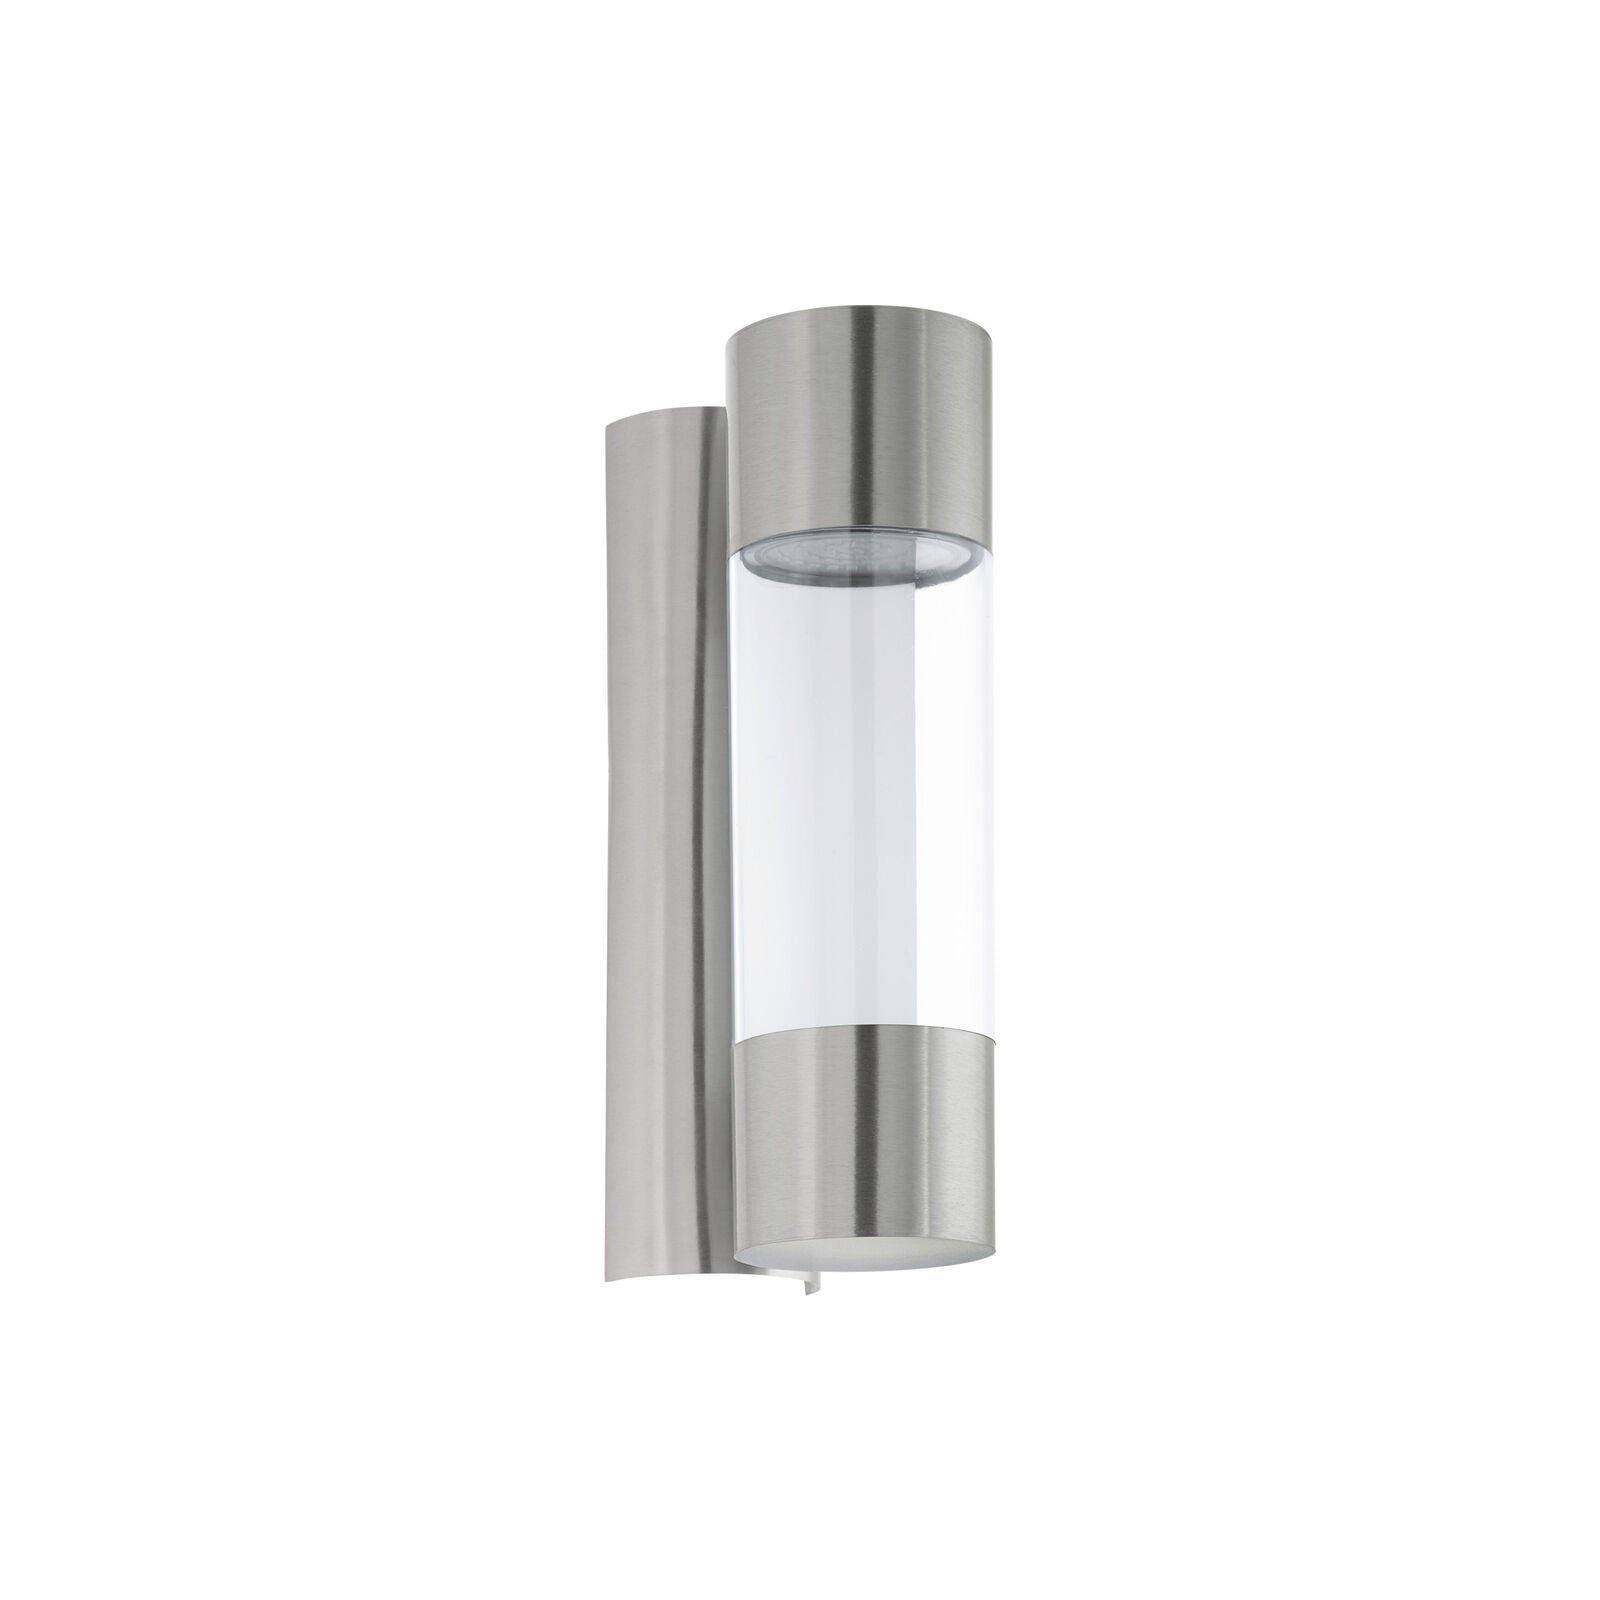 IP44 Outdoor Wall Light Stainless Steel / Glass 3.7W Built in LED Porch Lamp - image 1